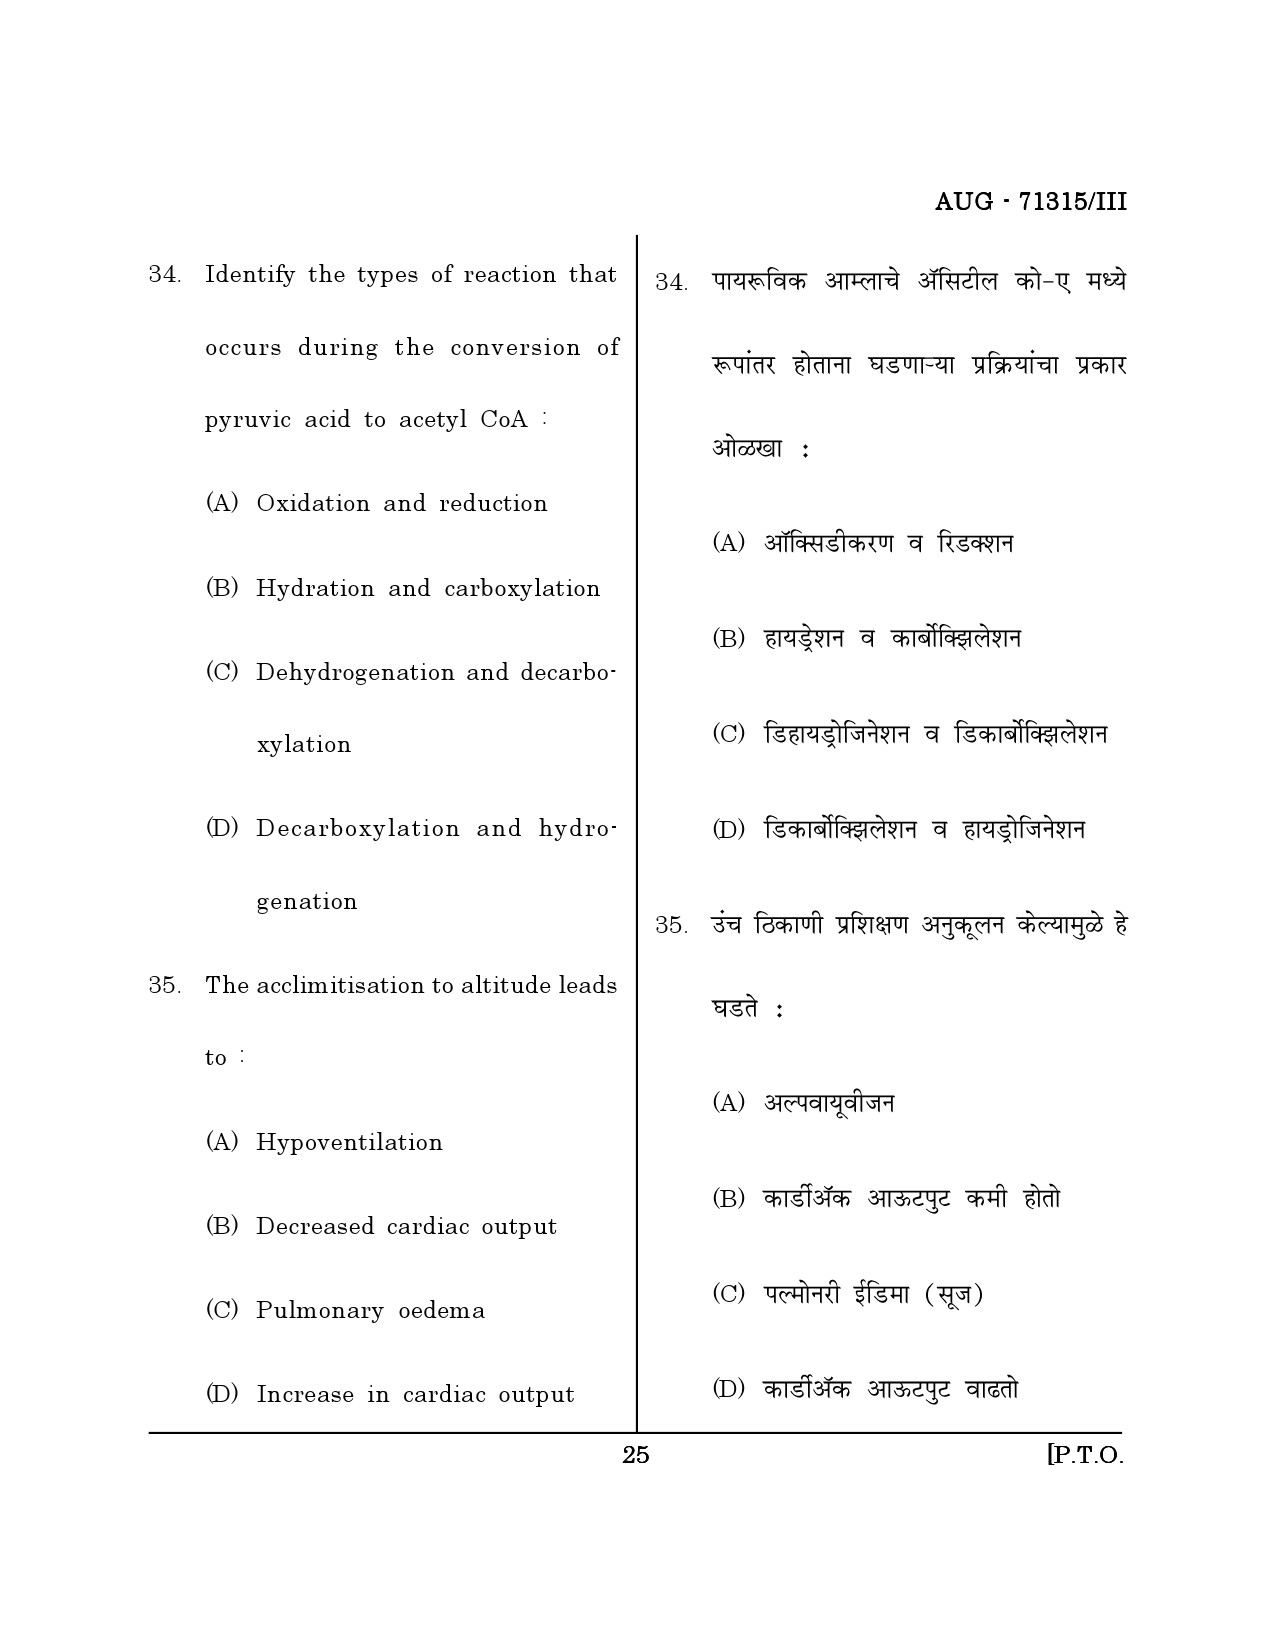 Maharashtra SET Physical Education Question Paper III August 2015 24